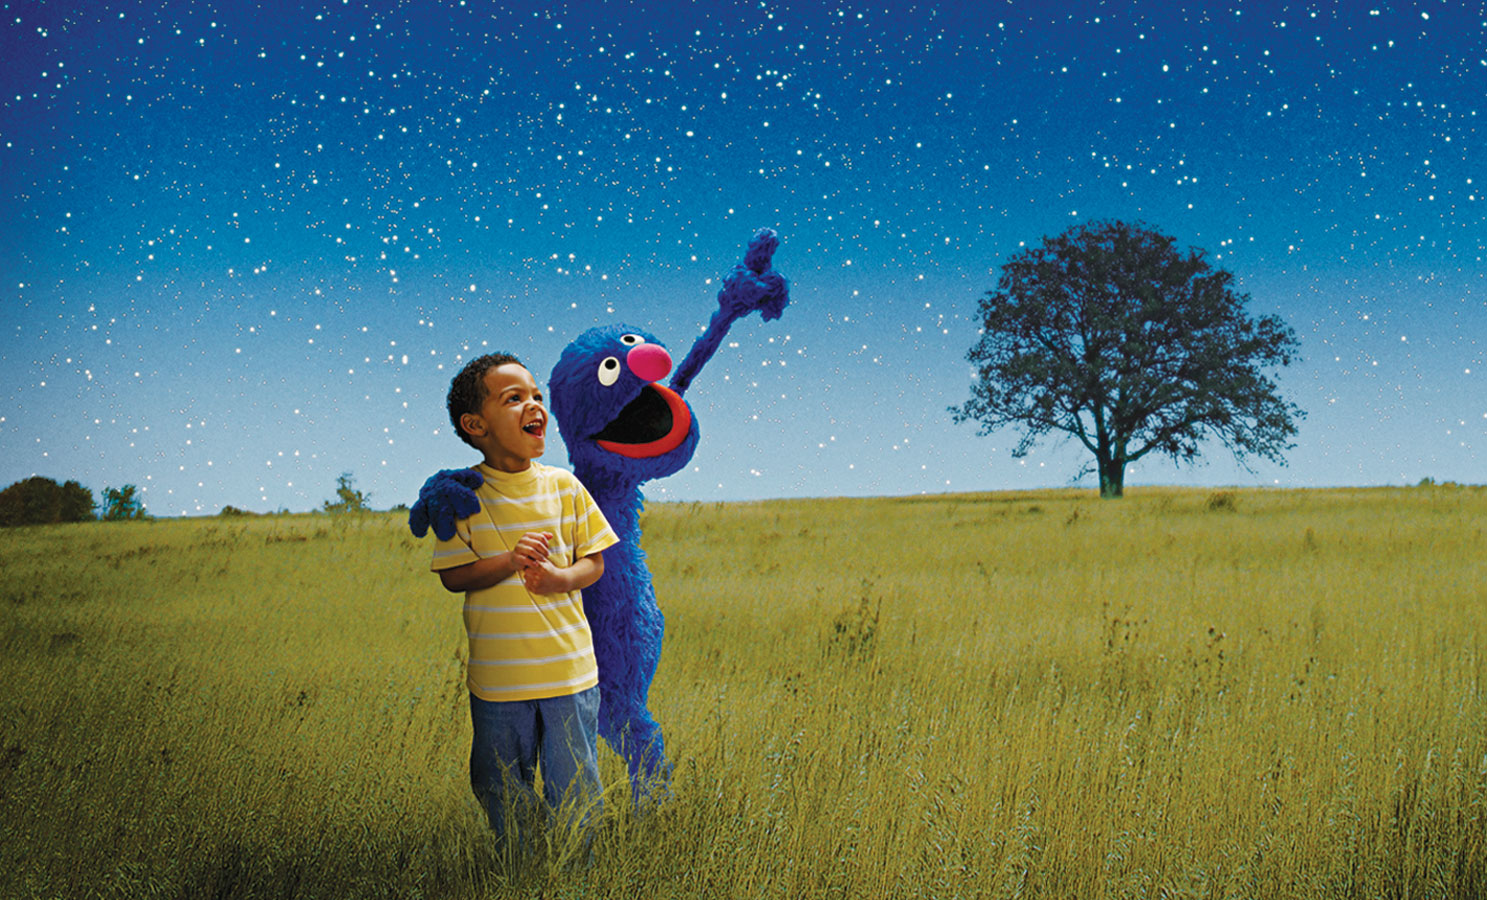 Grover and a young child stare up at the stars.